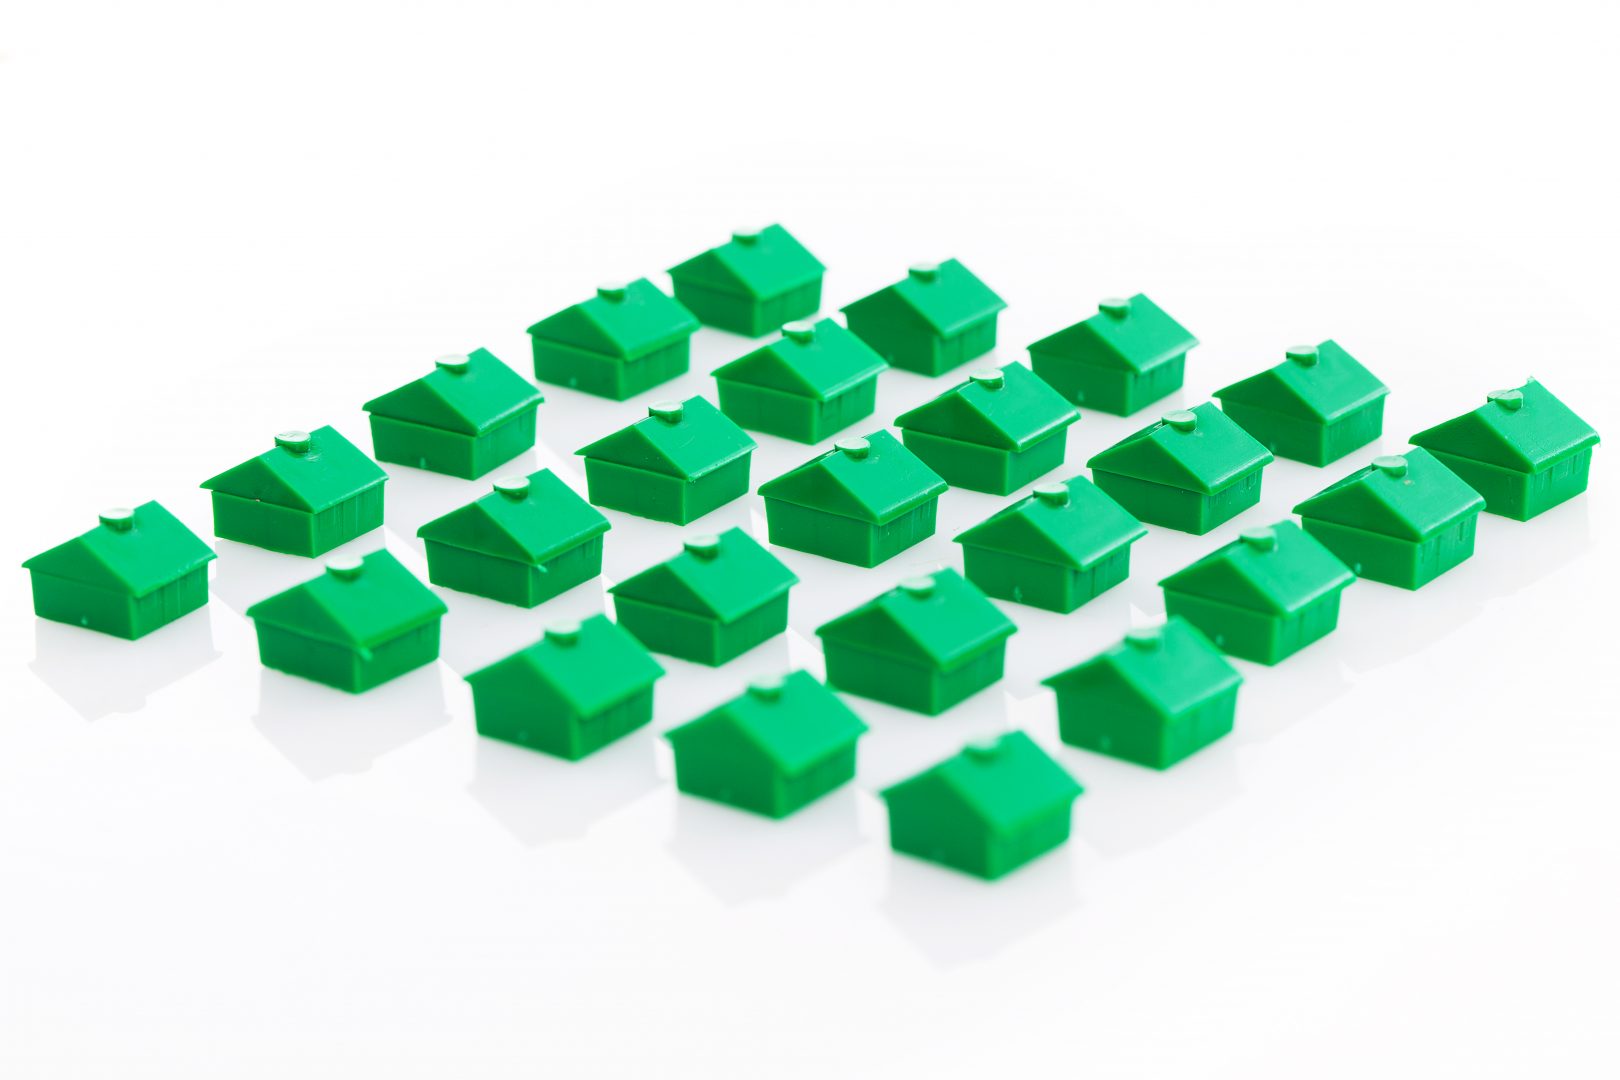 Many green toy houses over a white background